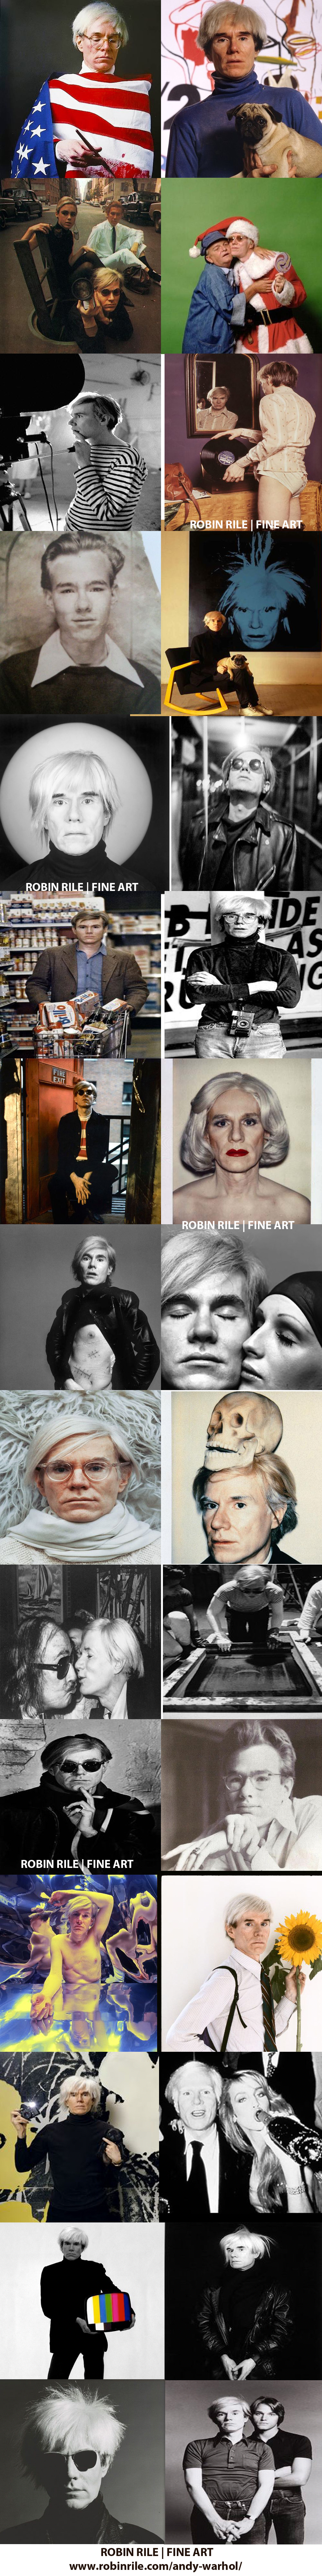 Photographs of Andy Warhol